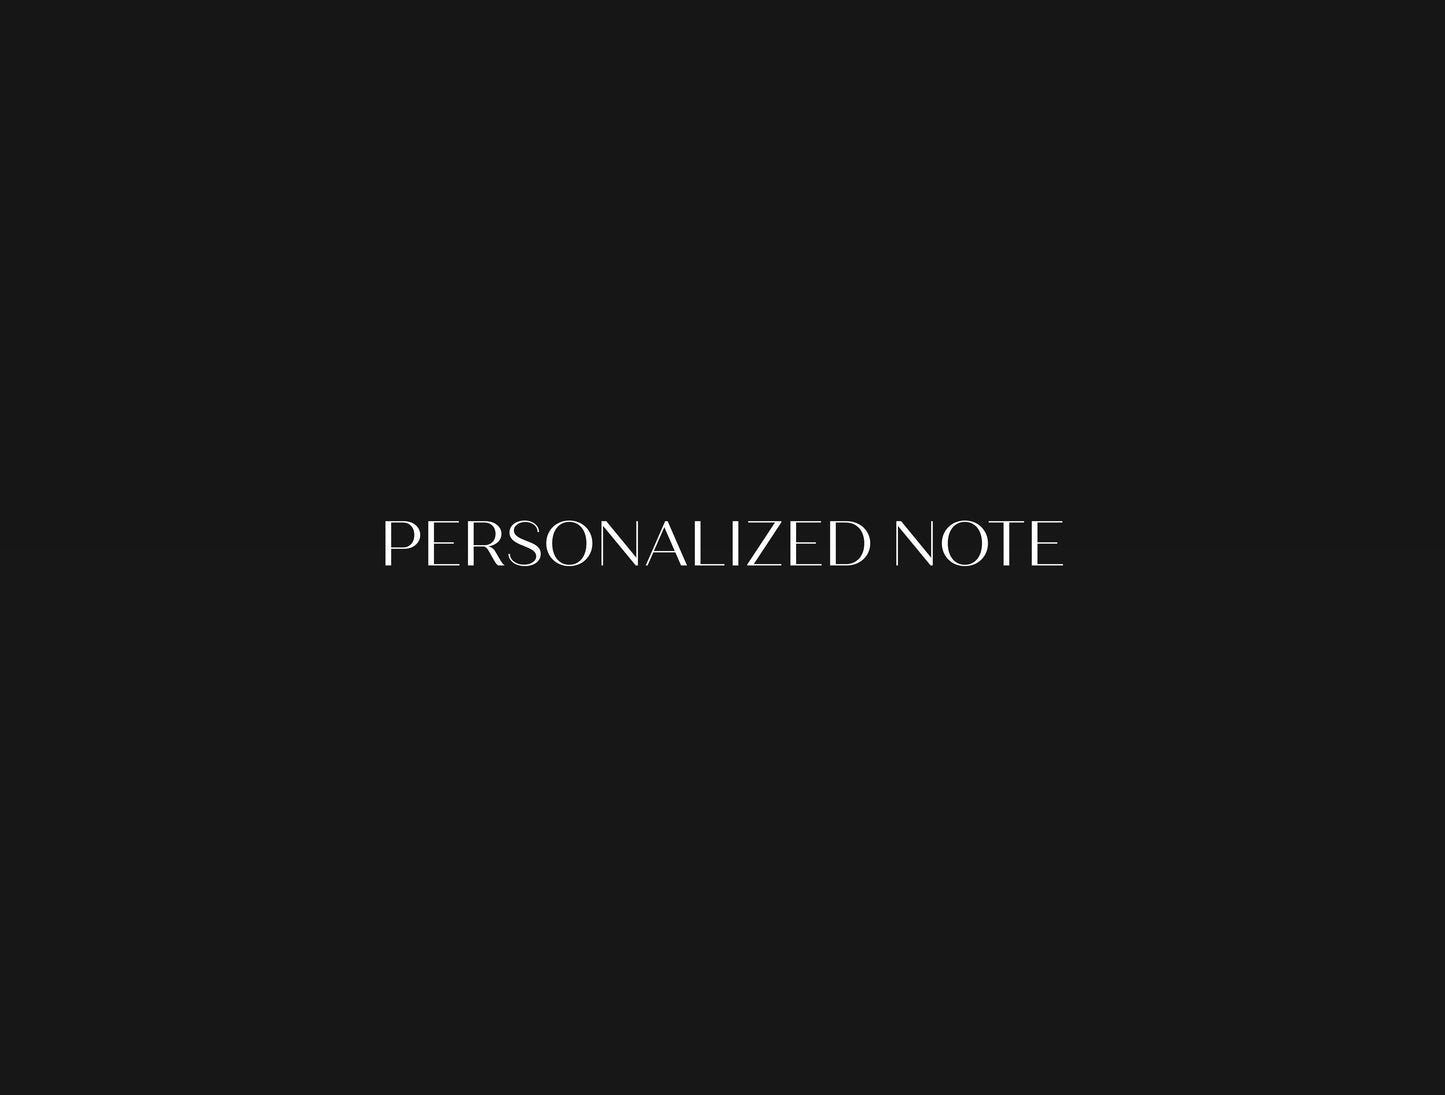 Personalized Note